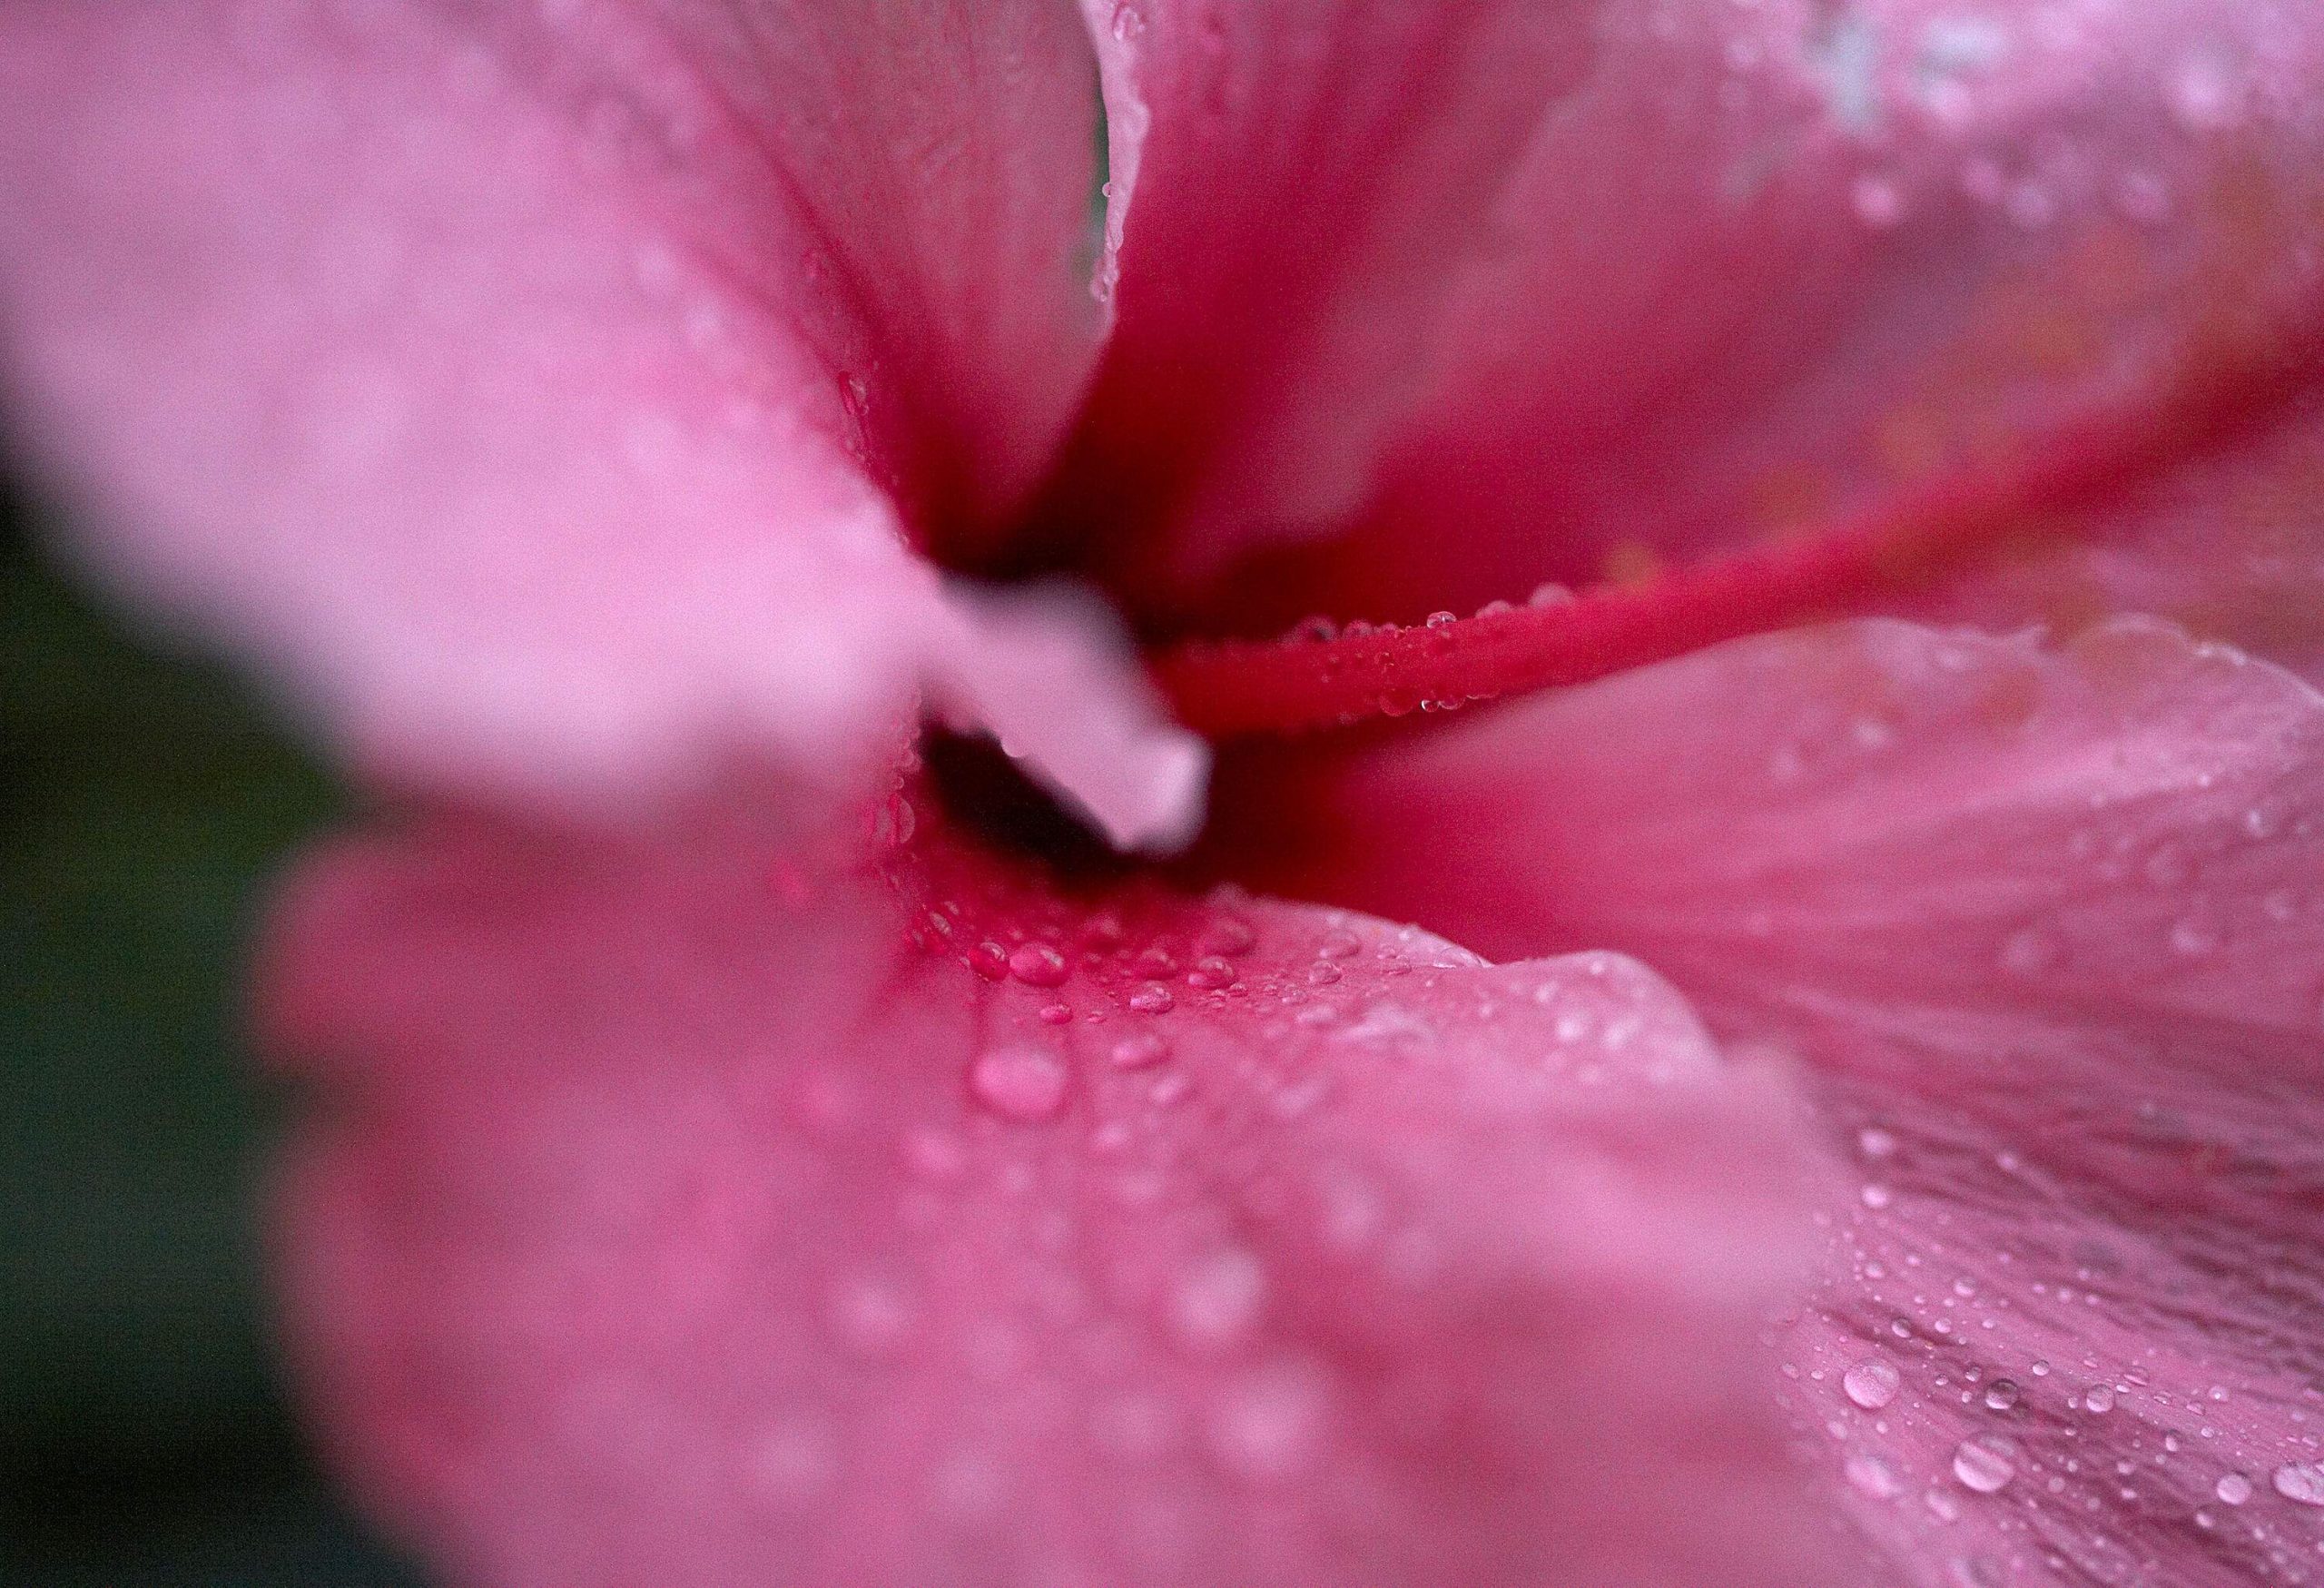 A flower's pink petals with water droplets.